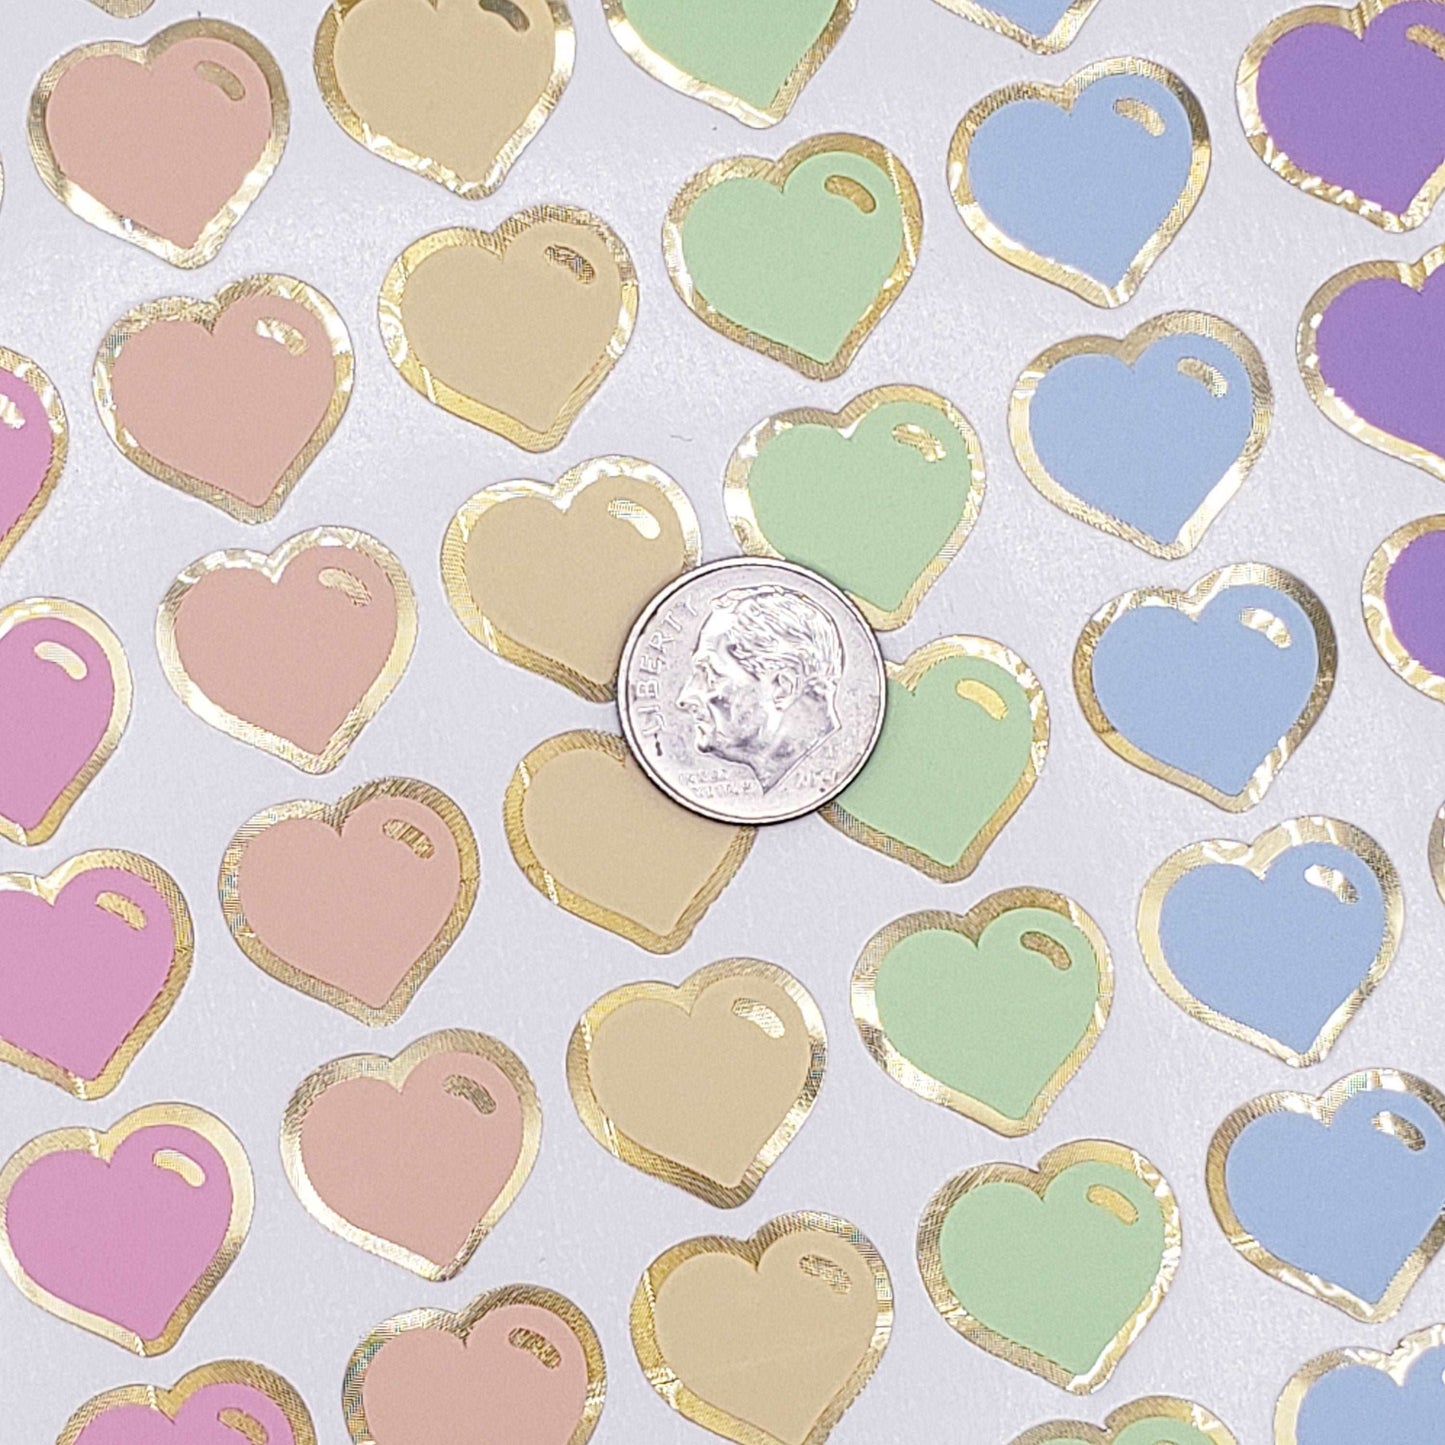 Pastel Rainbow Heart Stickers for Valentine's Day Cards and envelopes, set of 60 small heart decals for journals, notes and scrapbooks.